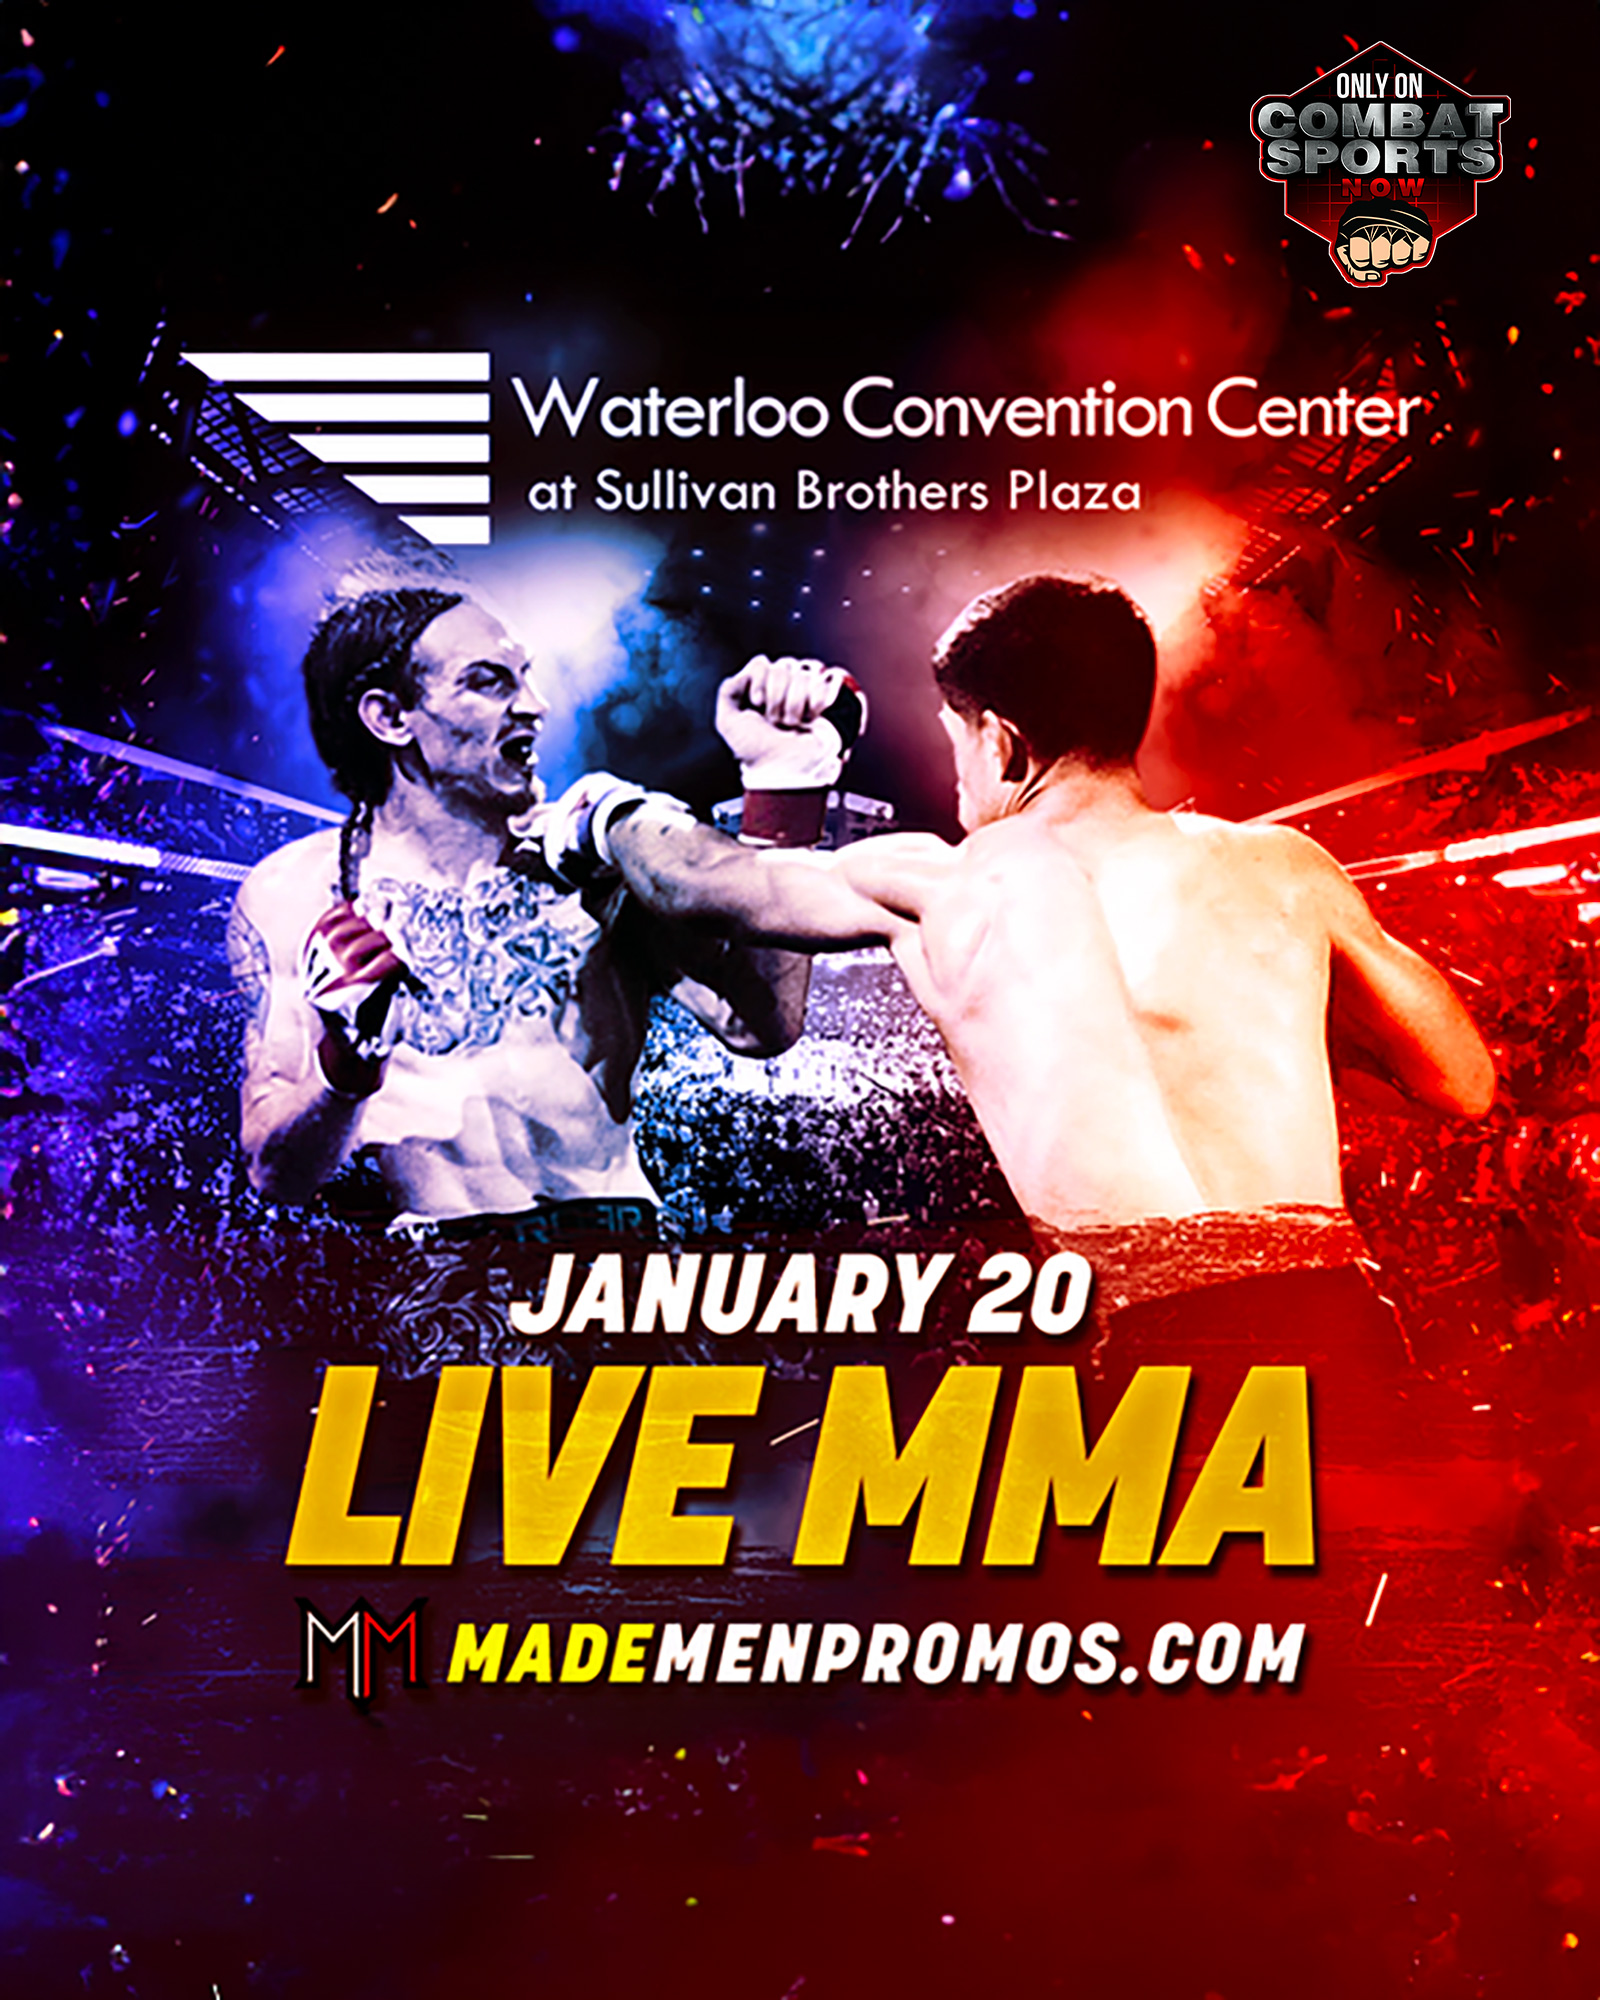 Live MMA at Waterloo Convention Center Live on Combat Sports Now